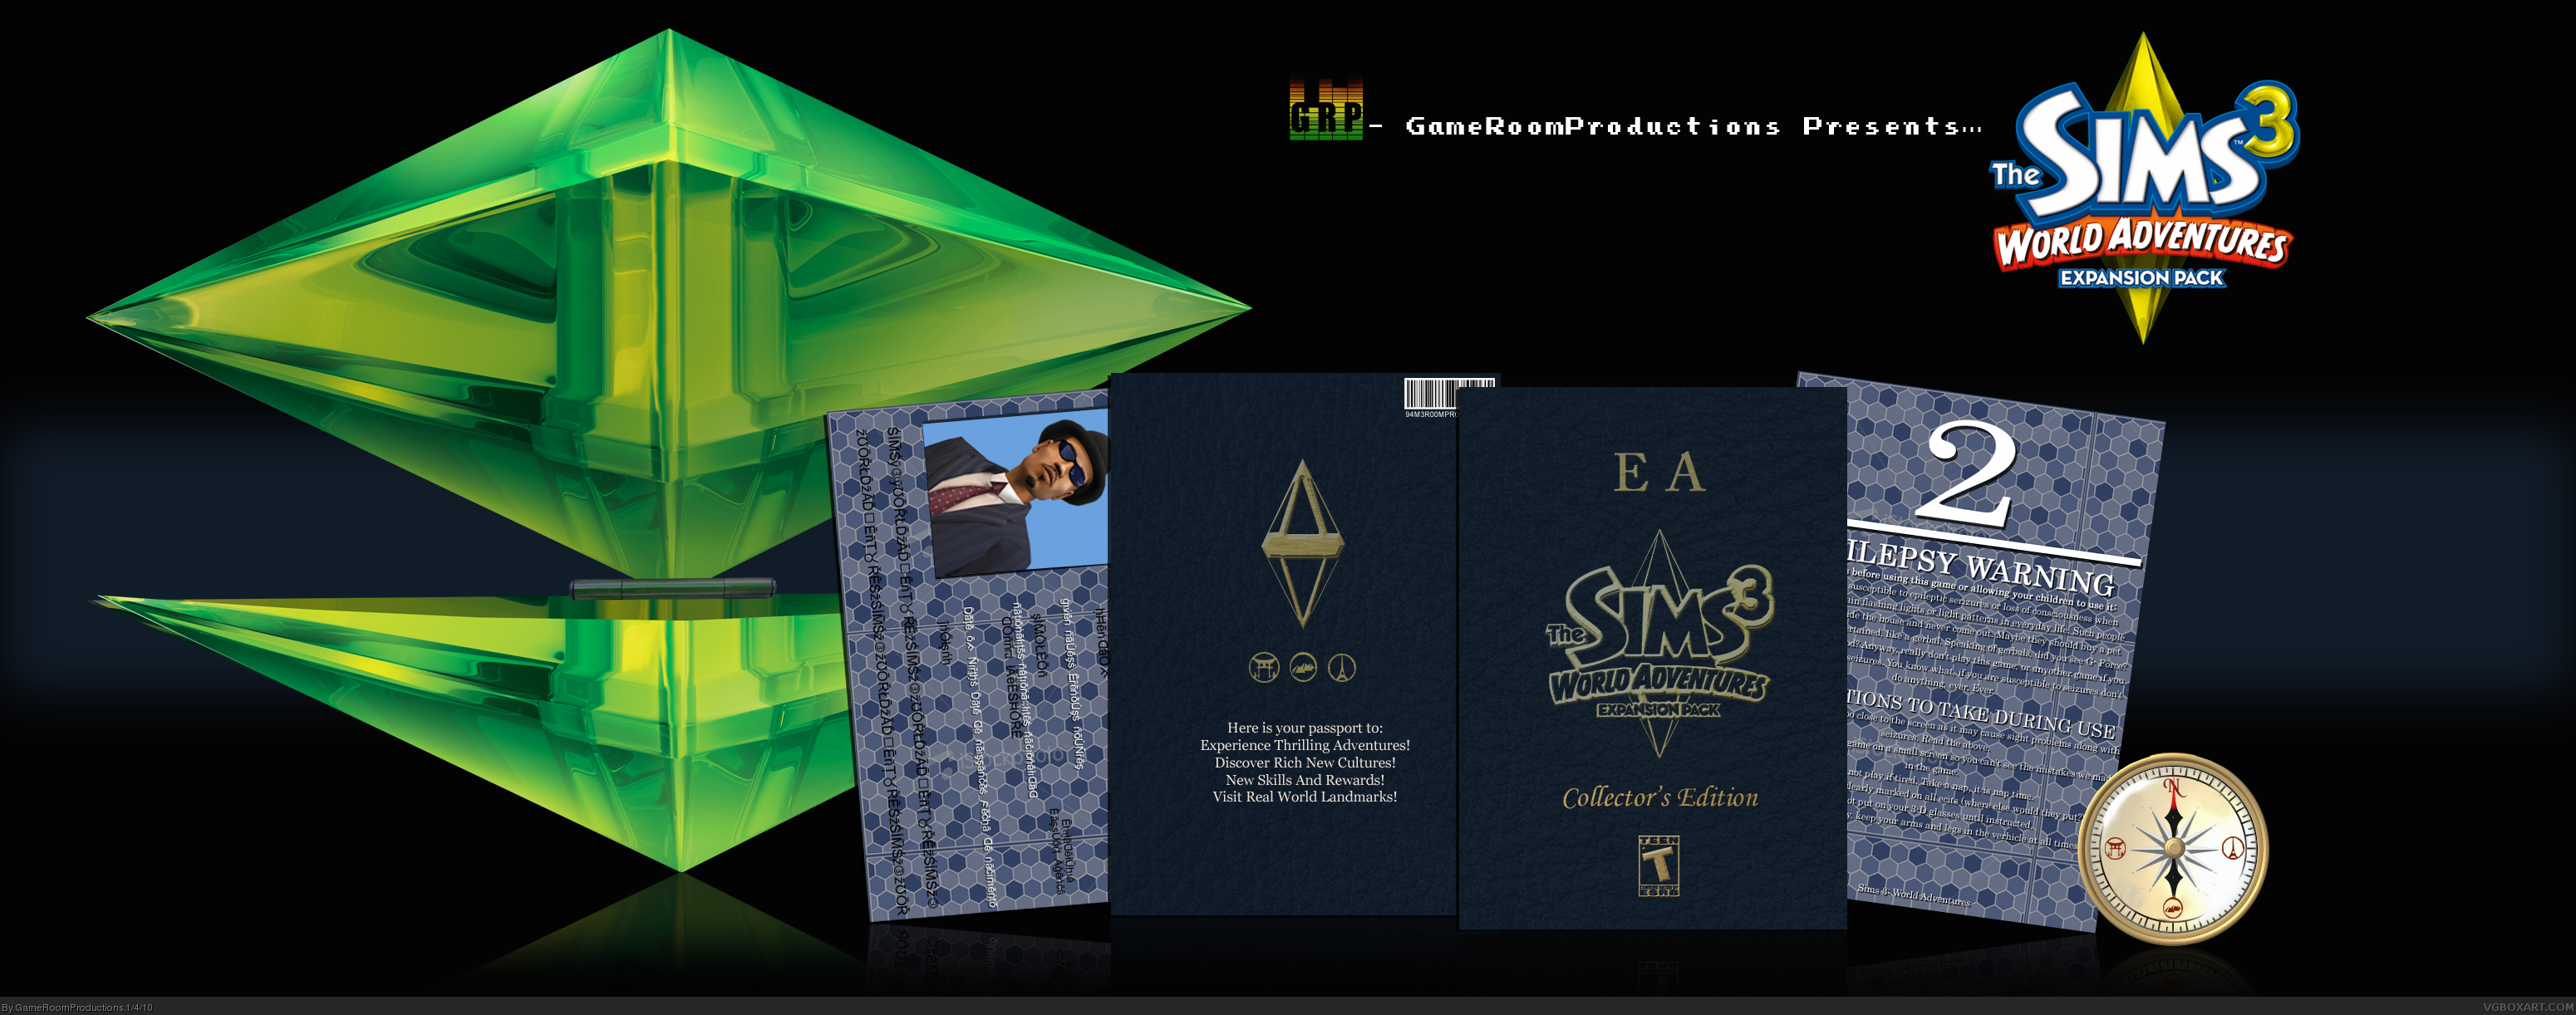 The Sims 3: World Adventures Collector's Edition box cover